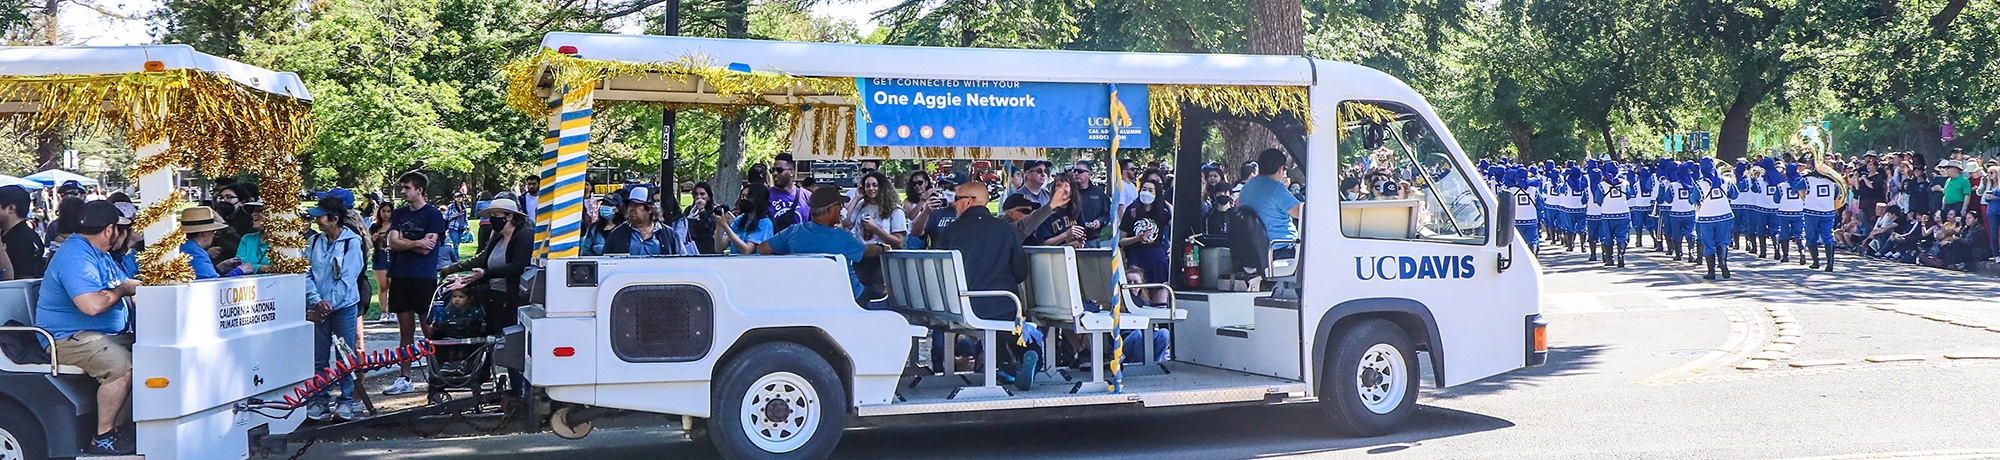 One Aggie Network's tram at the Picnic Day parade.